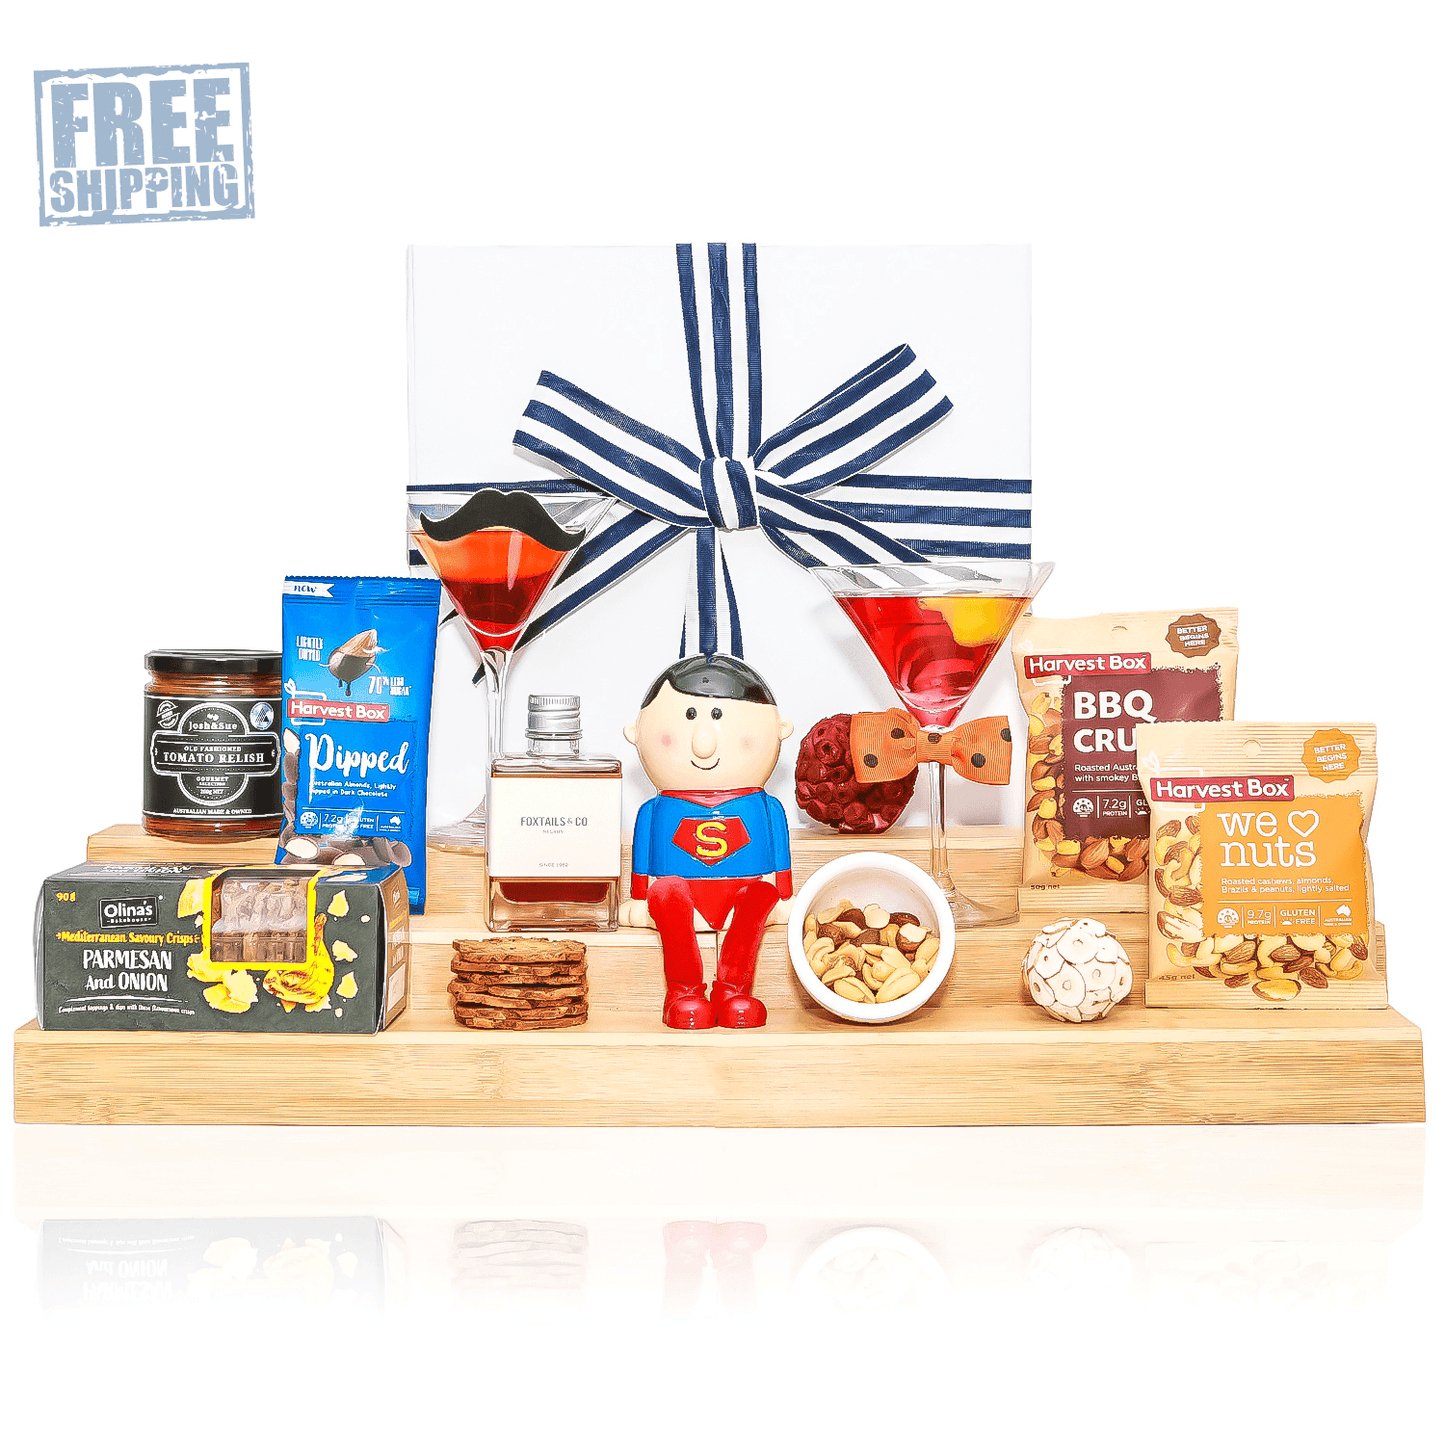 Fathers Day Cocktail Hamper - Healthy Belly Hampers - pure indulgence - birthday hampers - gift hampers - gift hampers melbourne - gift hampers australia - organic hampers -vegan hampers - gluten free hampers - birthday hampers -anniversary hampers - wedding hampers - alcohol hampers